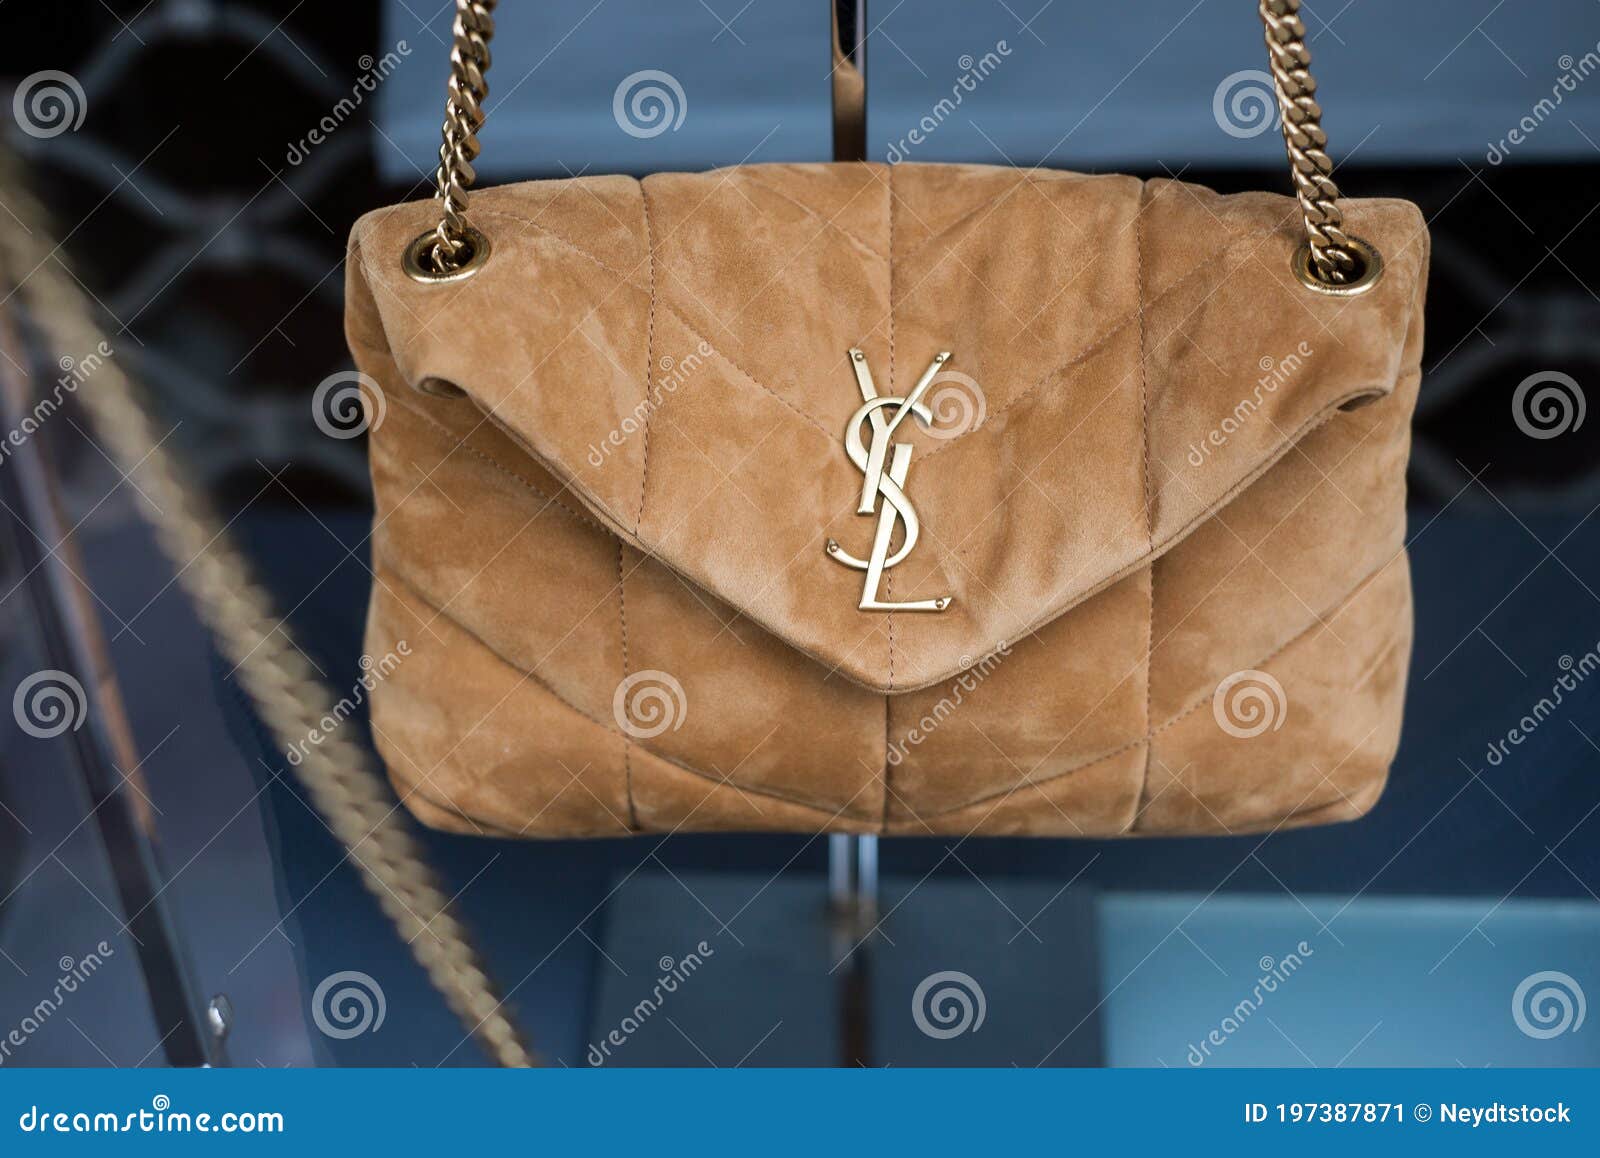 Beige Yves Saint Laurent Handbag in a Luxury Fashion Store Showroom  Editorial Photo - Image of brown, commerce: 197387871